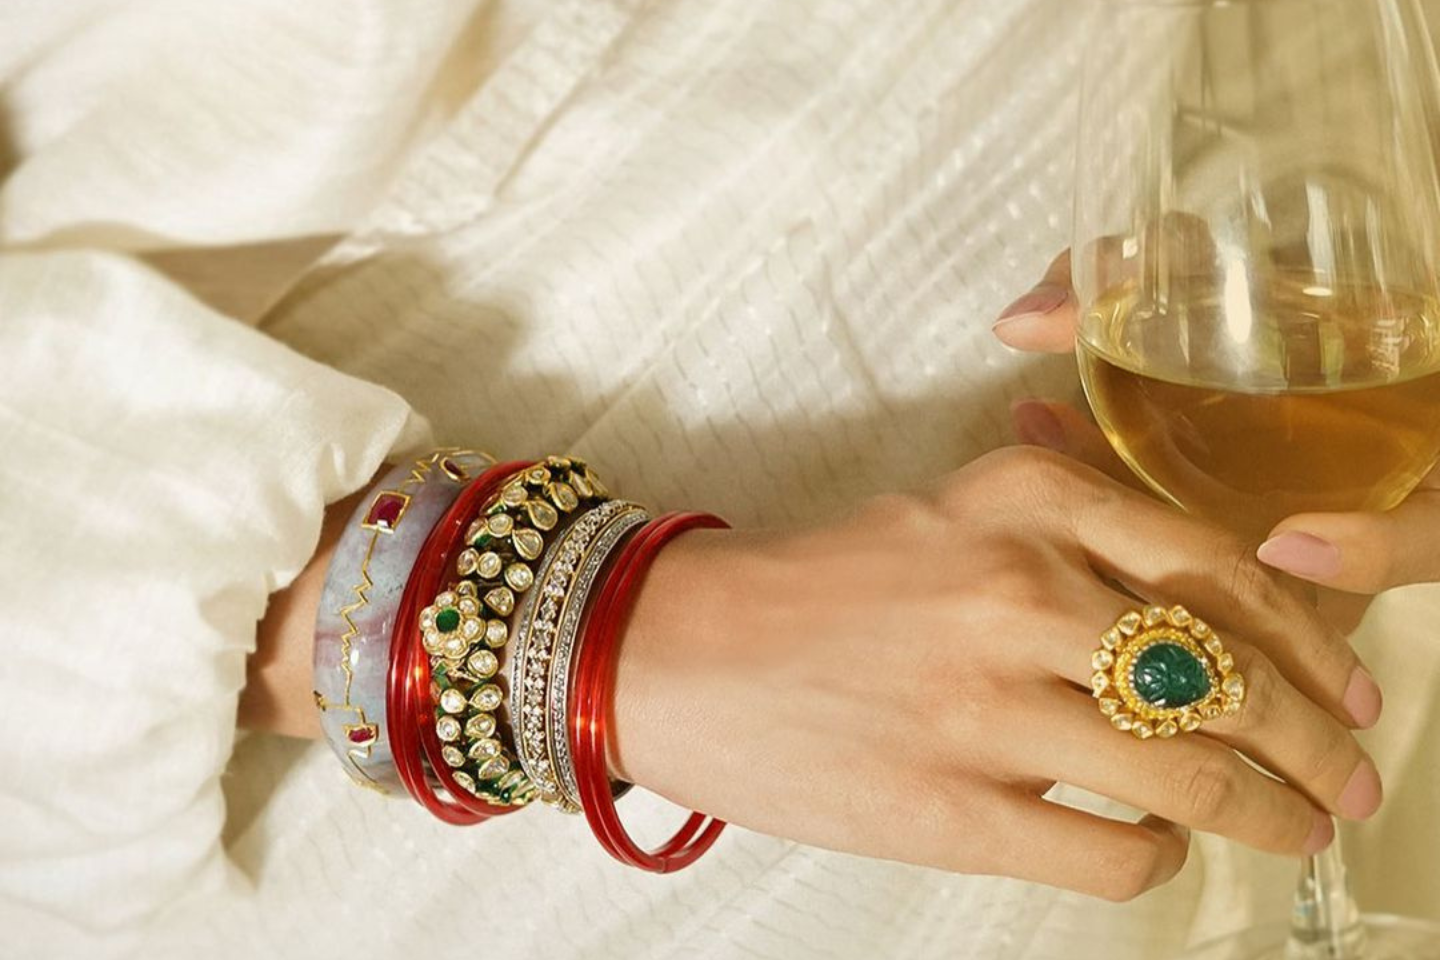 How To Curate The Ultimate Fine-Jewelry Collection